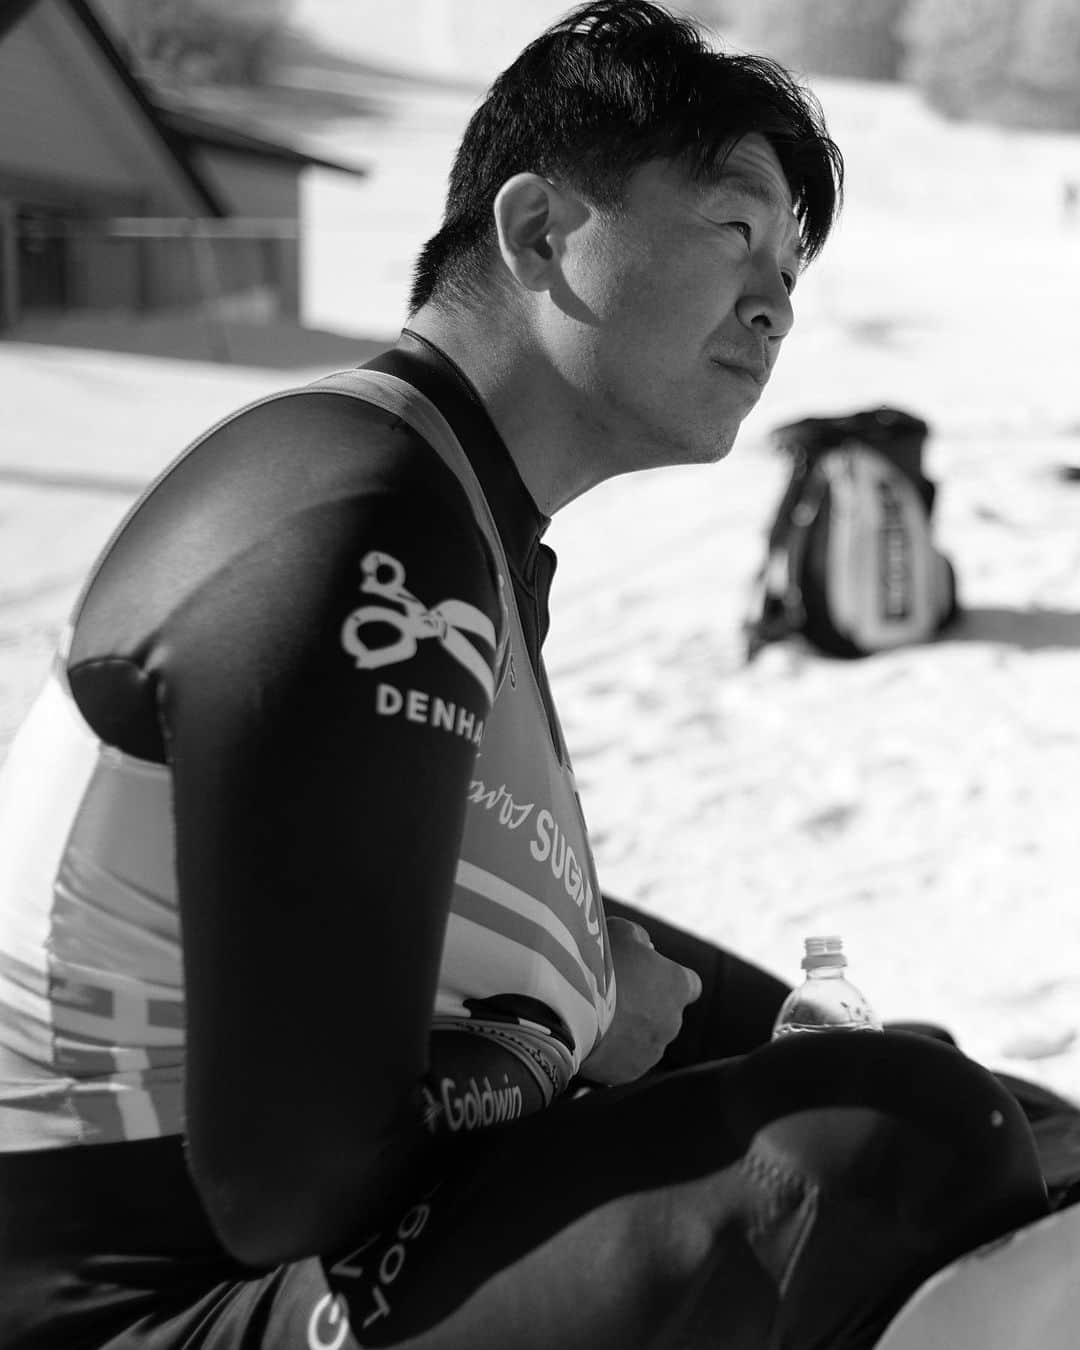 佐々木明さんのインスタグラム写真 - (佐々木明Instagram)「March 3, 2023, exactly one year to the day he decided to return. Akira Sasaki @akiraexploring competed in the Far East Cup at Sugadaira Ski Resort in Nagano Prefecture. In what is effectively the highest race on the Asian continent, Akira Sasaki finished 5th. He had to cover up a shoulder injury sustained at the beginning of the year and had to compete in races in North America and Asia, which caused pain in his knee and left him with wounds both physically and mentally. He took painkillers and worked as hard as possible to recover his strength and spirit until the very last minute before the race.   However, once he started to ski, his spirited performance caught the attention of the audience.  This winter will mark the second year of his challenge to become the world's No. 1 skier after recovering from his injury and training again.  Akira Sasaki is currently ranked 4th in Japan. He will return to Europe, the world's top alpine skiing stage.  2023年3月3日、復帰を決めた日からちょうど1年。佐々木明は長野県にある菅平スキー場で行われたファーイーストカップに出場した。事実上、アジア大陸最高峰と謳われるそのレースで残したリザルトは5位。年明けに負傷した肩を庇いながら、北米、アジアのレースを転戦し続けた影響で、膝にも痛みを抱えることとなり、心身ともに満身創痍の状態。痛み止めを飲み、出走するギリギリの時間まで、可能な限り体力と精神の回復に努めた。  しかし、ひとたび彼が滑り出せば、その気迫に満ちた滑りに会場の人々が注目した。  怪我からの復帰を果たし、再びトレーニングを重ね、世界一という目標を掲げた挑戦は、この冬2年目を迎える。  現在、日本ランキング4位。佐々木明は、アルペンスキー世界最高峰の舞台、ヨーロッパに活動の場を戻す。  Production @Rightup_inc. Director of Photography @utawatanabe Photographer @abe_yusuke」11月30日 19時07分 - akiraexploring